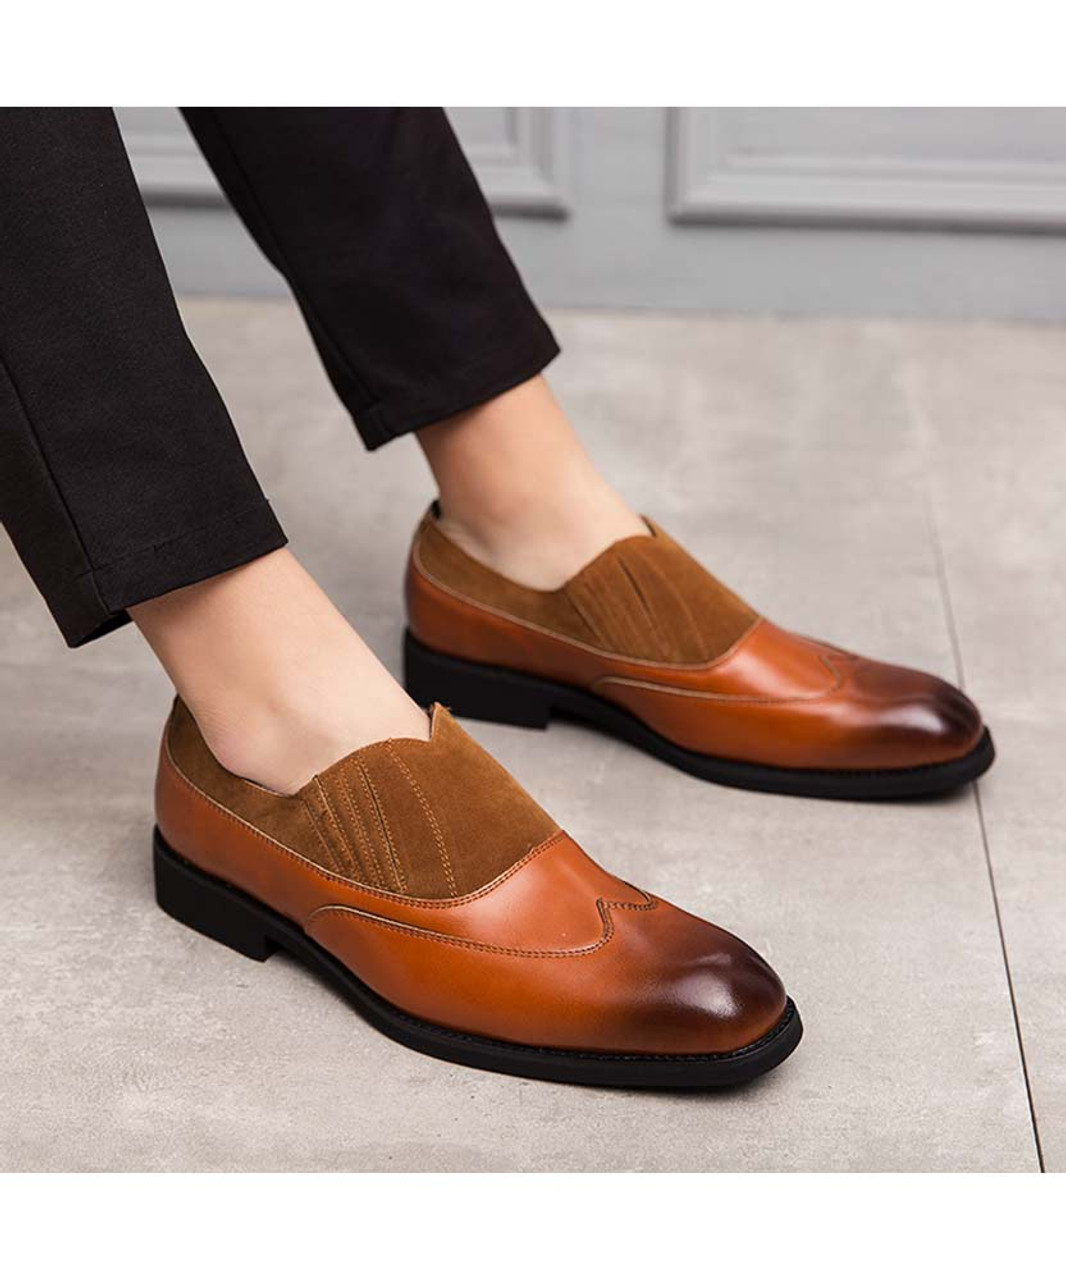 Brown retro sewed effect leather slip on dress shoe | Mens dress shoes ...